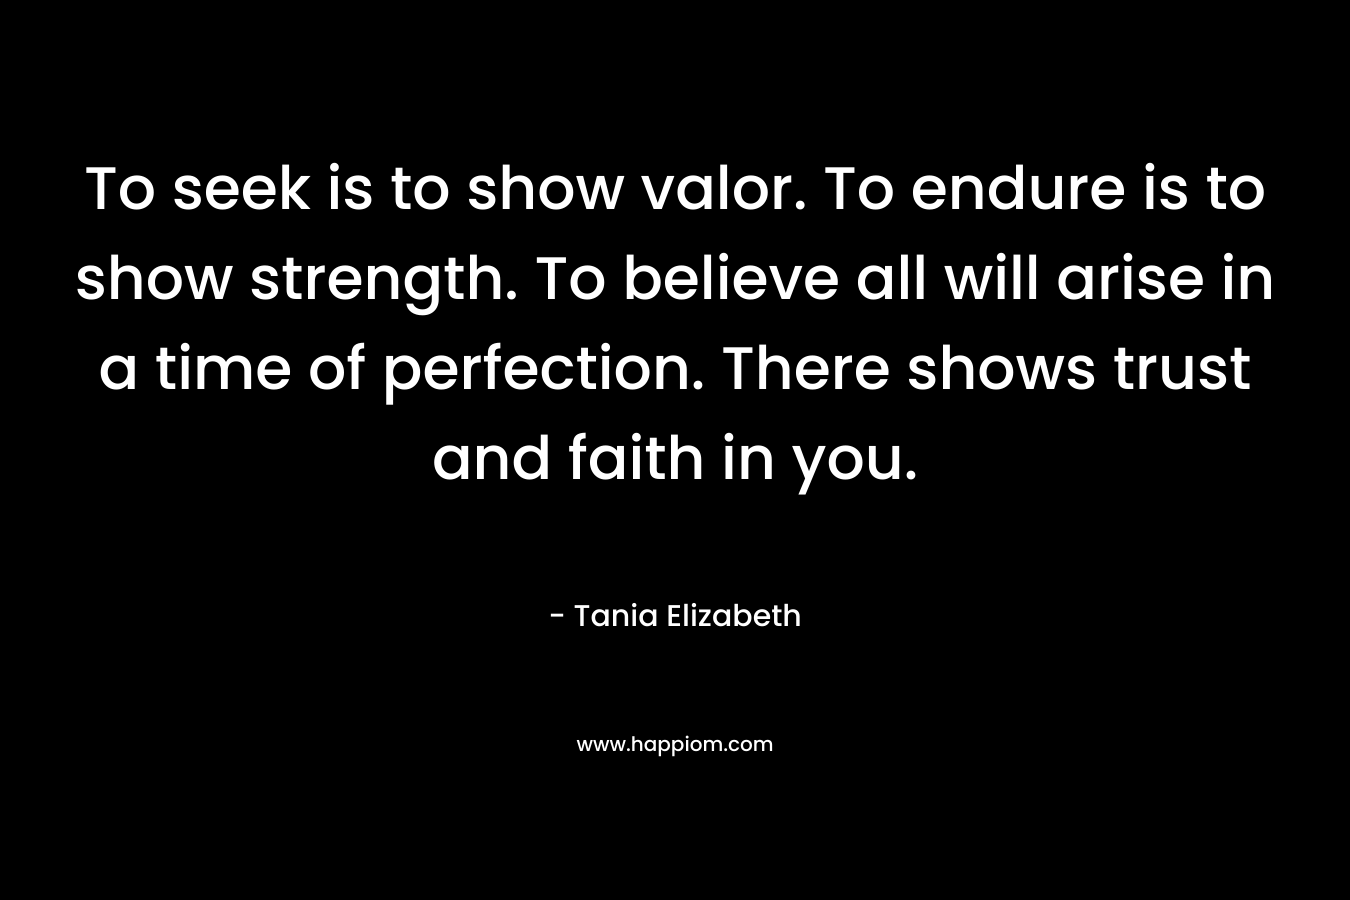 To seek is to show valor. To endure is to show strength. To believe all will arise in a time of perfection. There shows trust and faith in you. – Tania Elizabeth